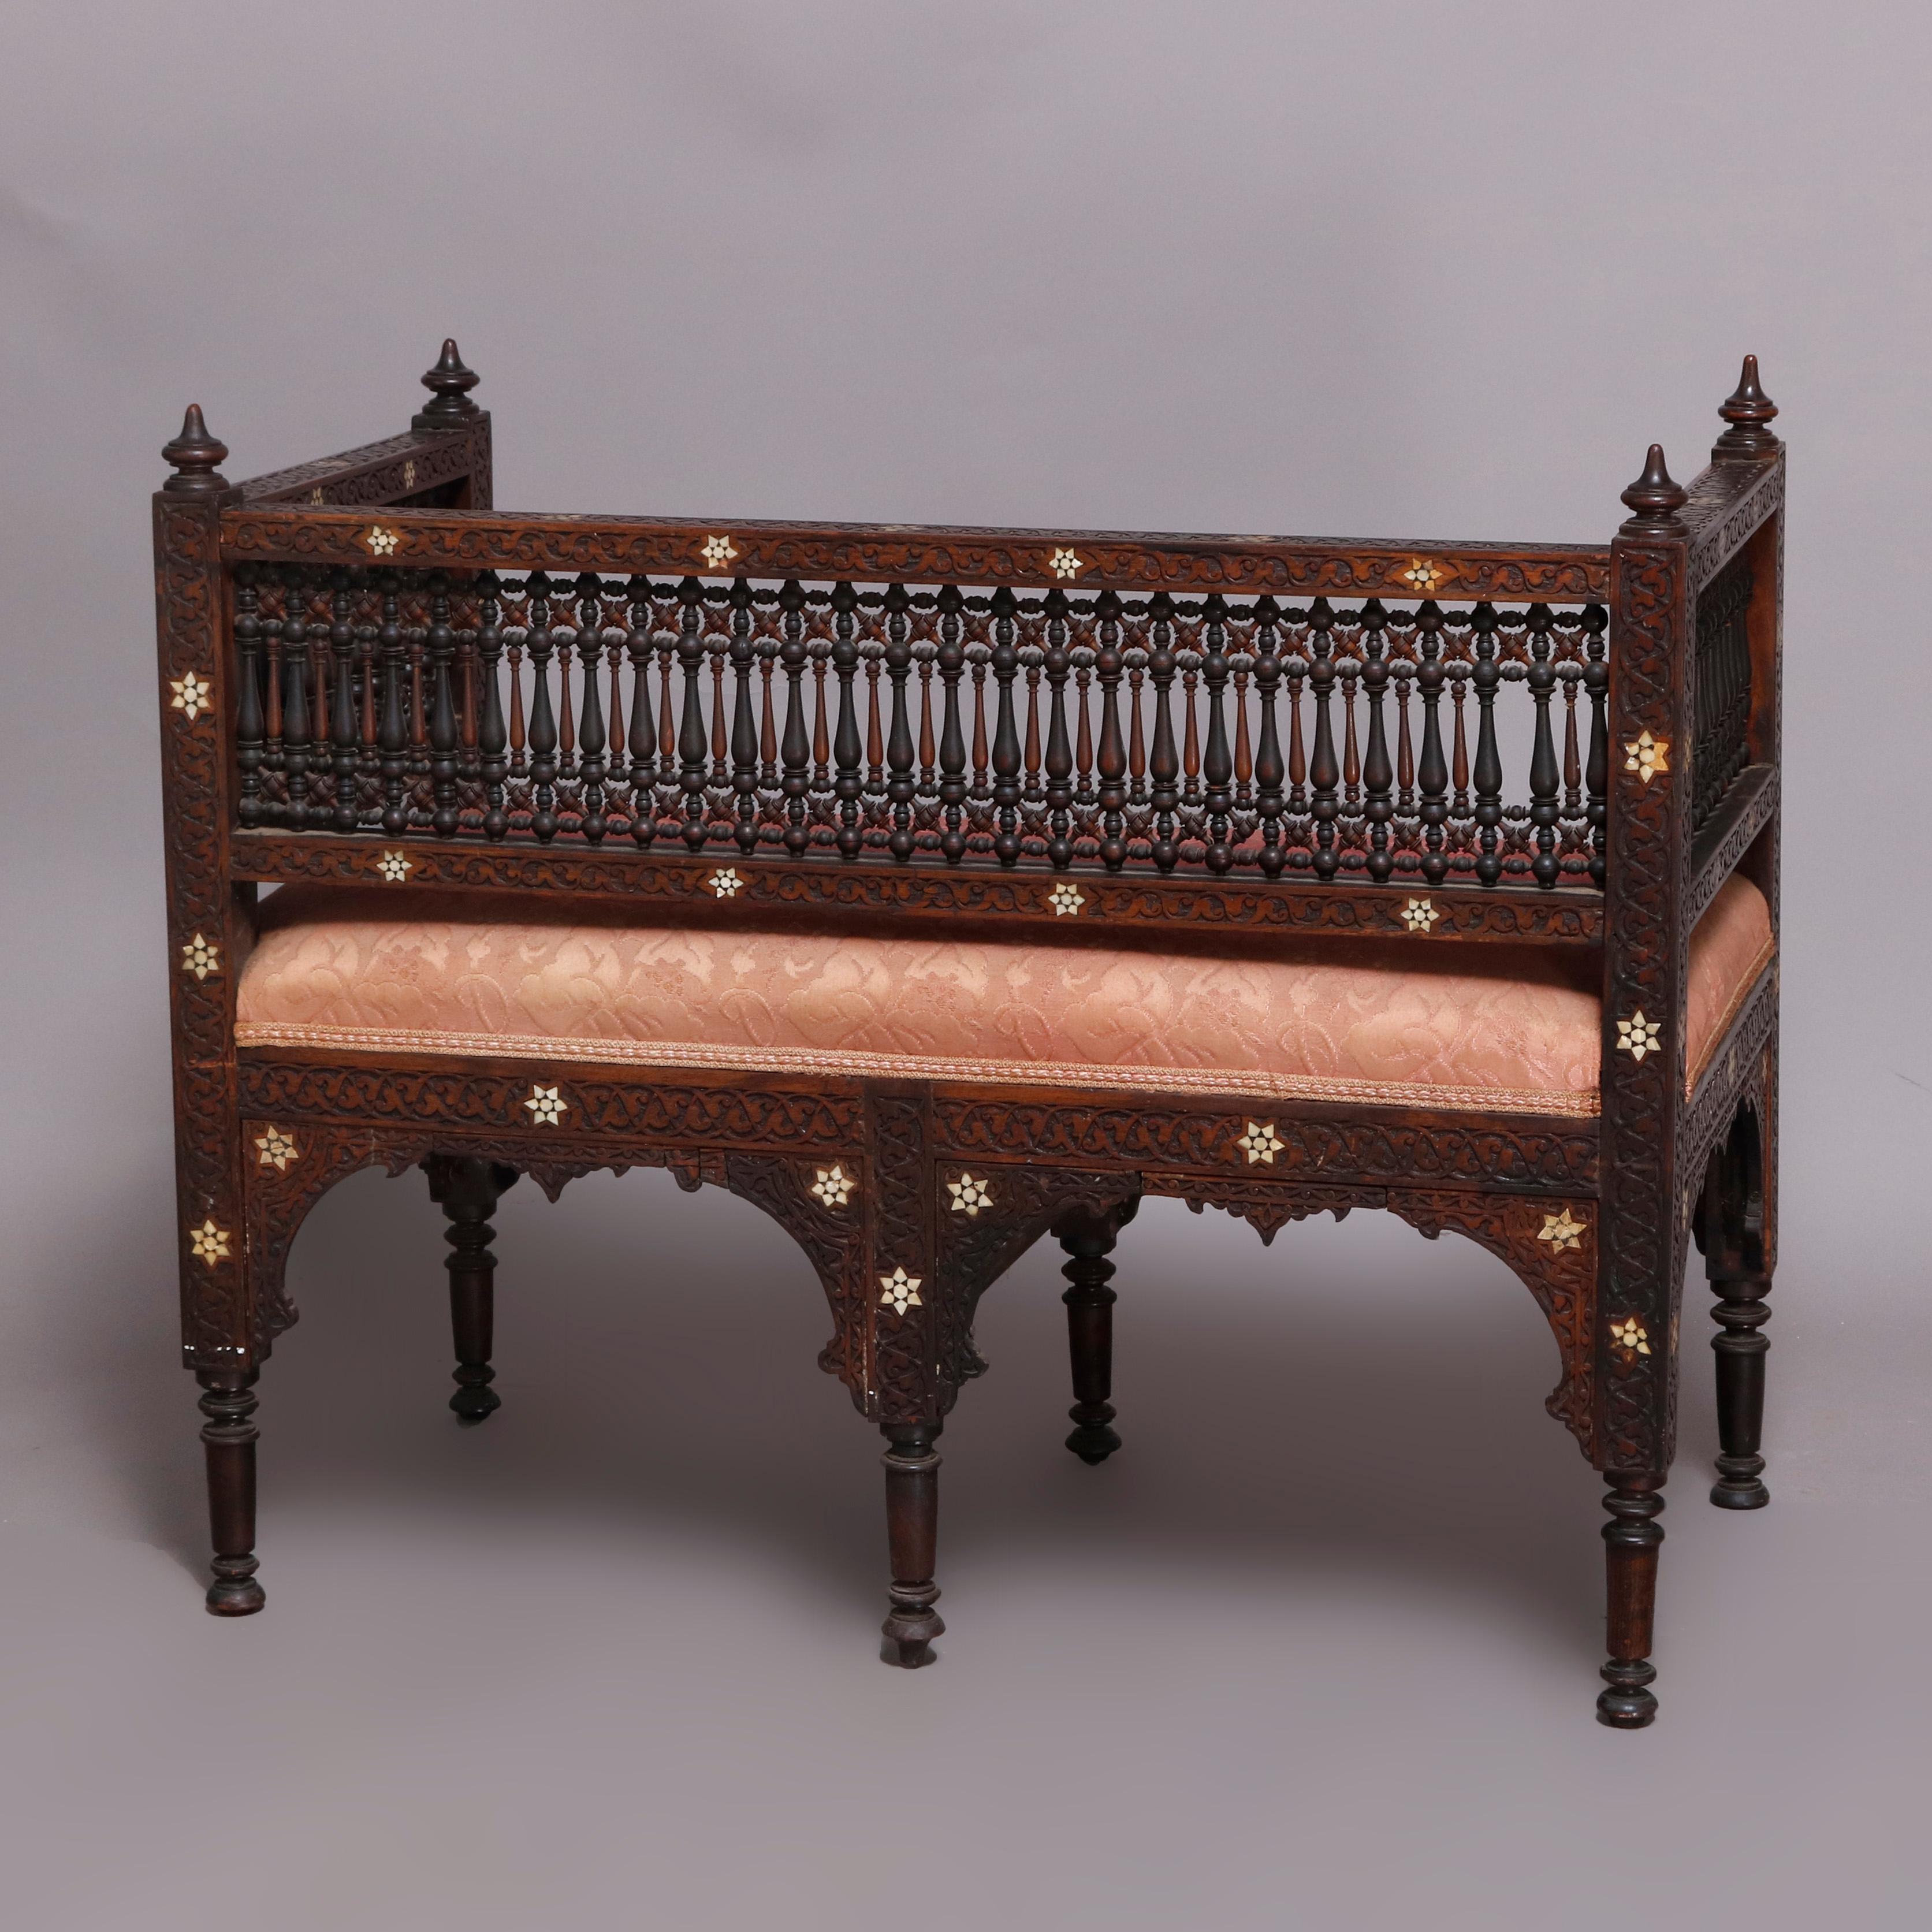 An antique Syrian Orientalist settee offers carved hardwood construction with back and arms having alternating shaped spindles with mother of pearl inlaid frame, upholstered seat and raised on carved and turned legs with arch form corbels, 19th